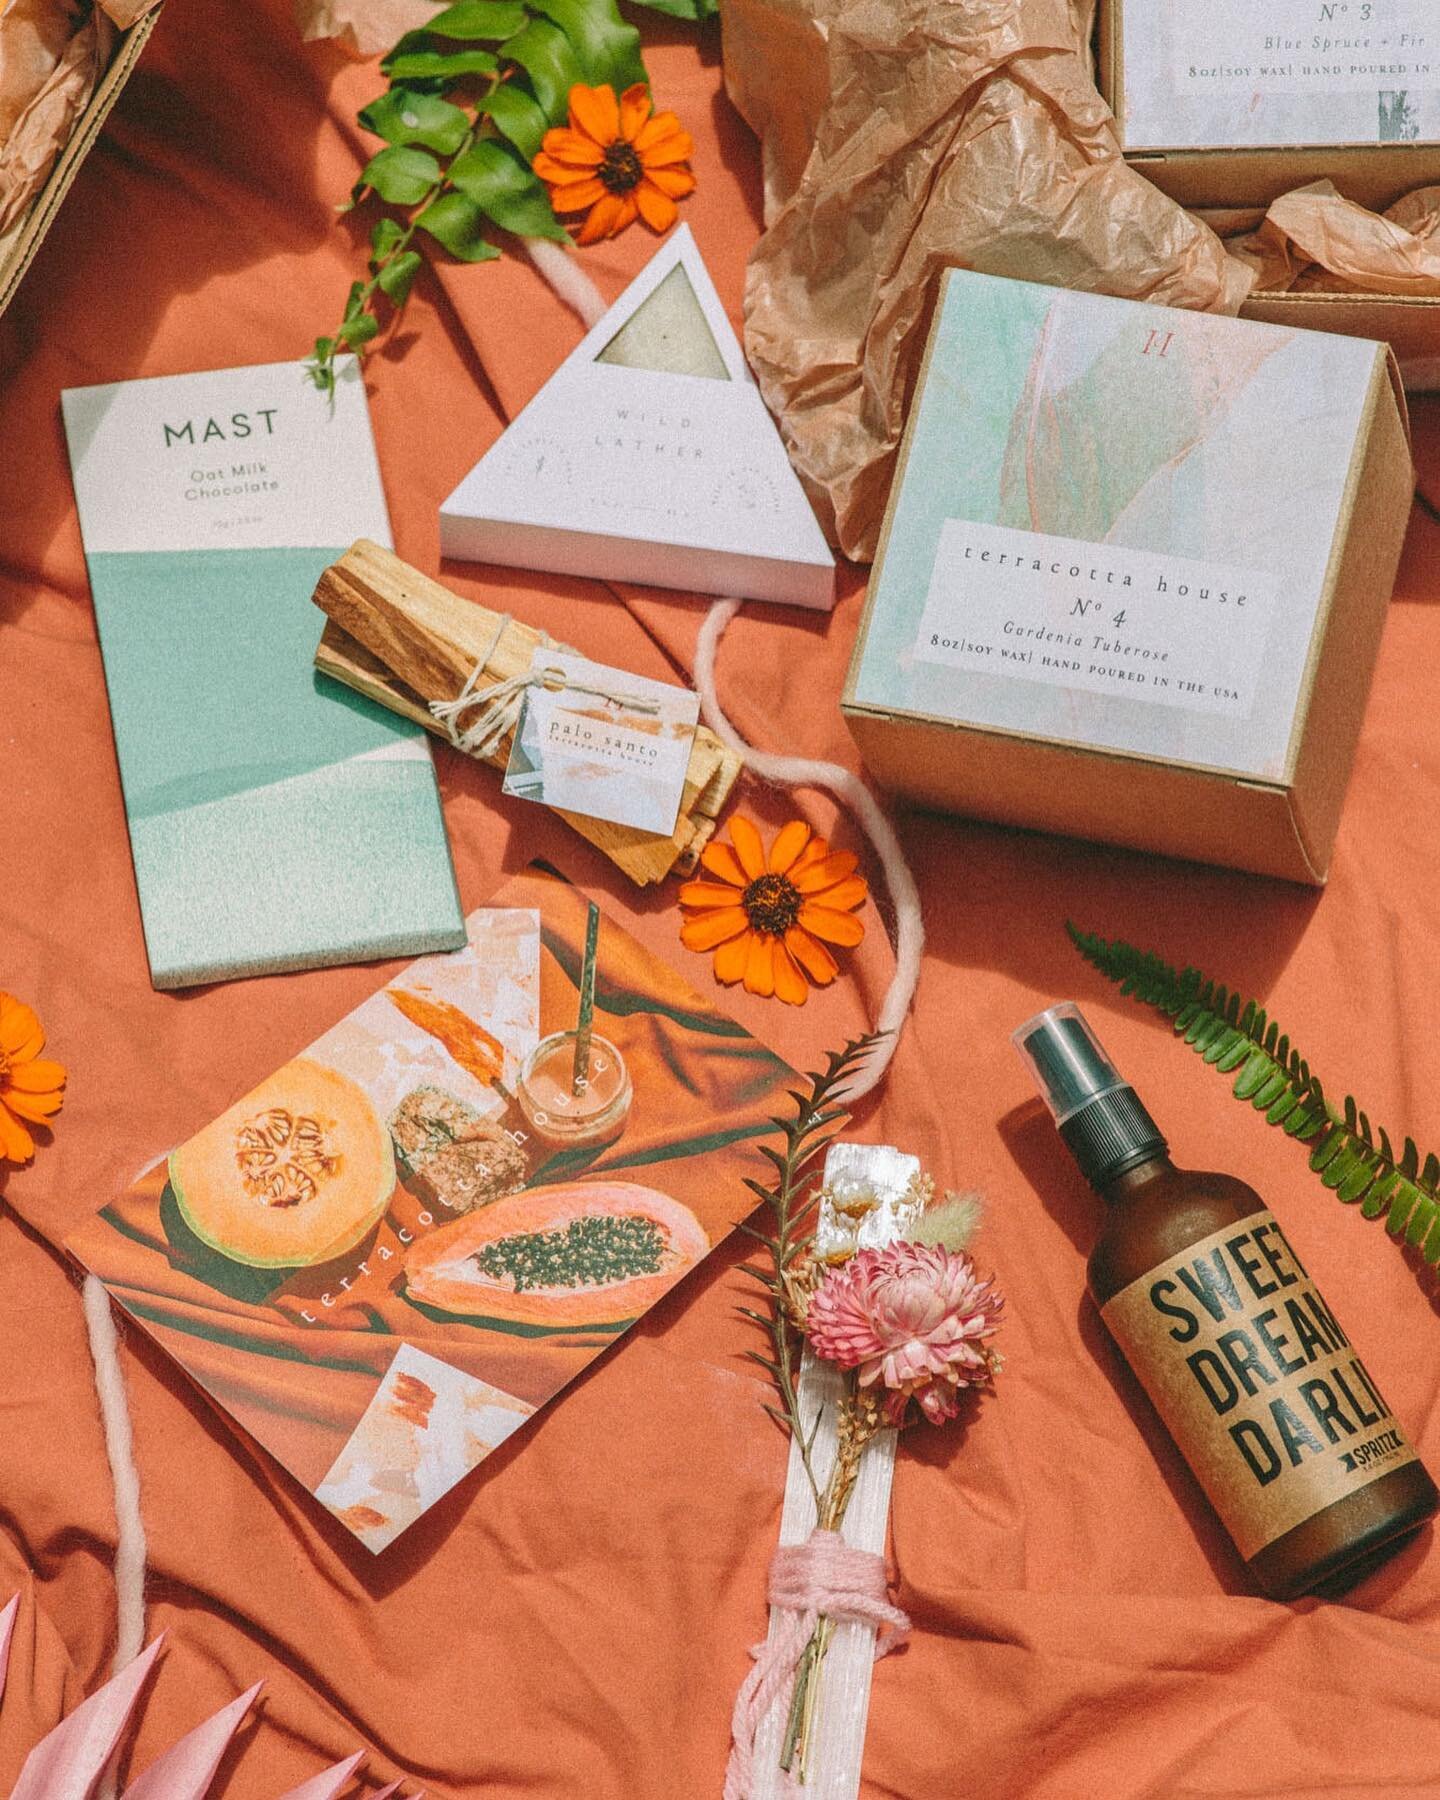 SALE✨ What are you getting Mom this Mother&rsquo;s Day?! We have all the botanical goodies boxed up in hand painted boxes and ready for you ! 
⠀⠀⠀⠀⠀⠀⠀⠀⠀
Shop the marketplace and use code : TERRACOTTAMOMMA20 for 20% off &lsquo;til Sunday ✨🌈🧡